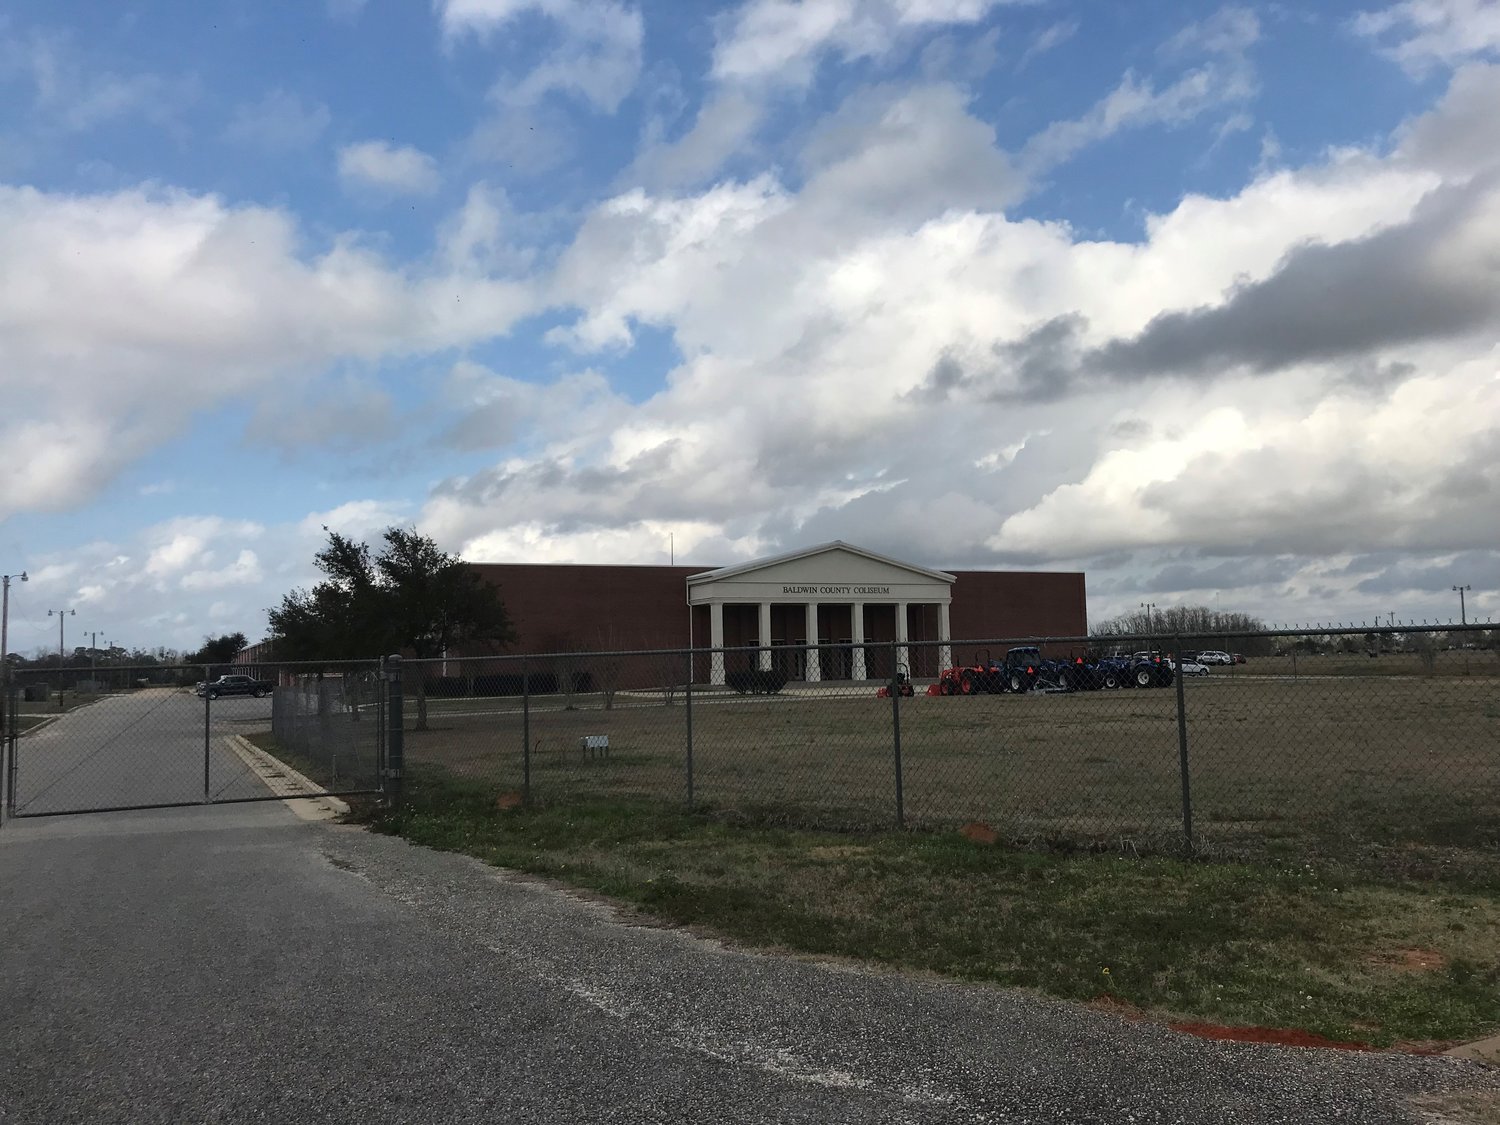 The fence in the front of the Baldwin County Coliseum site would be moved back and replaced by hedges under a city of Robertsdale plan for the site. Flower beds and a sidewalk would also be added.